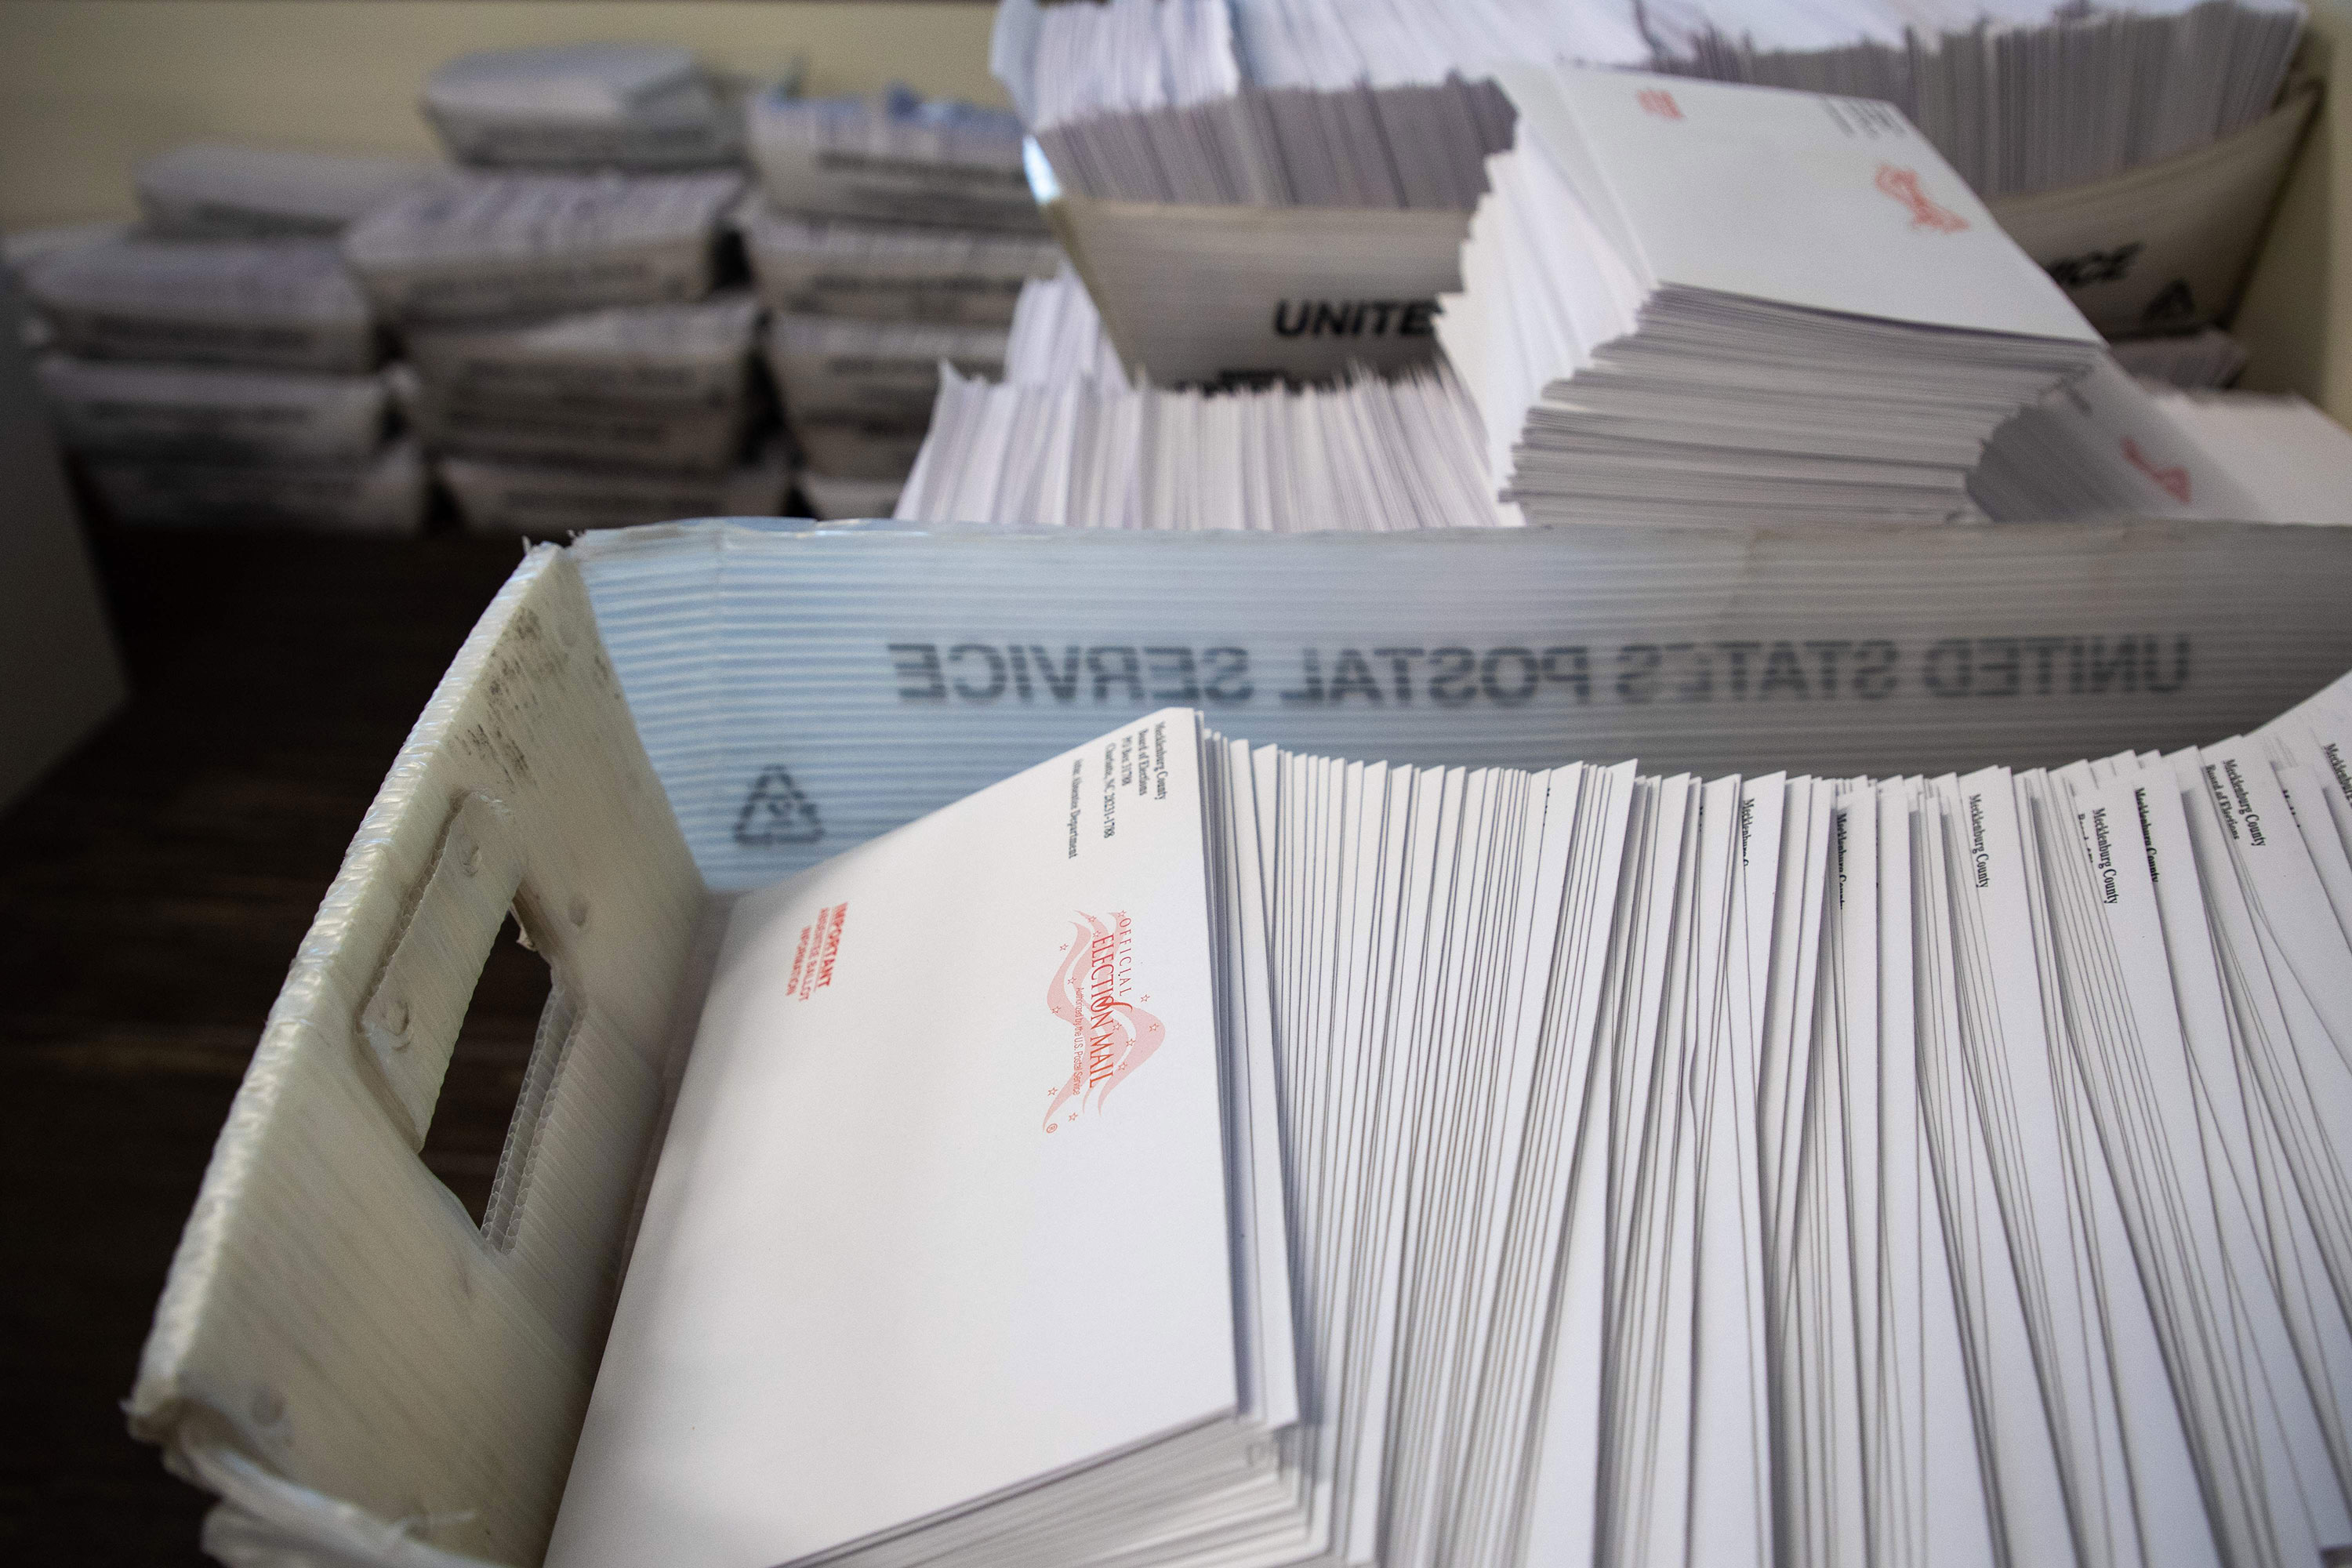 Large boxes of envelopes are seen as absentee ballot election workers stuff ballot applications at the Mecklenburg County Board of Elections office in Charlotte, North Carolina, on September 4.